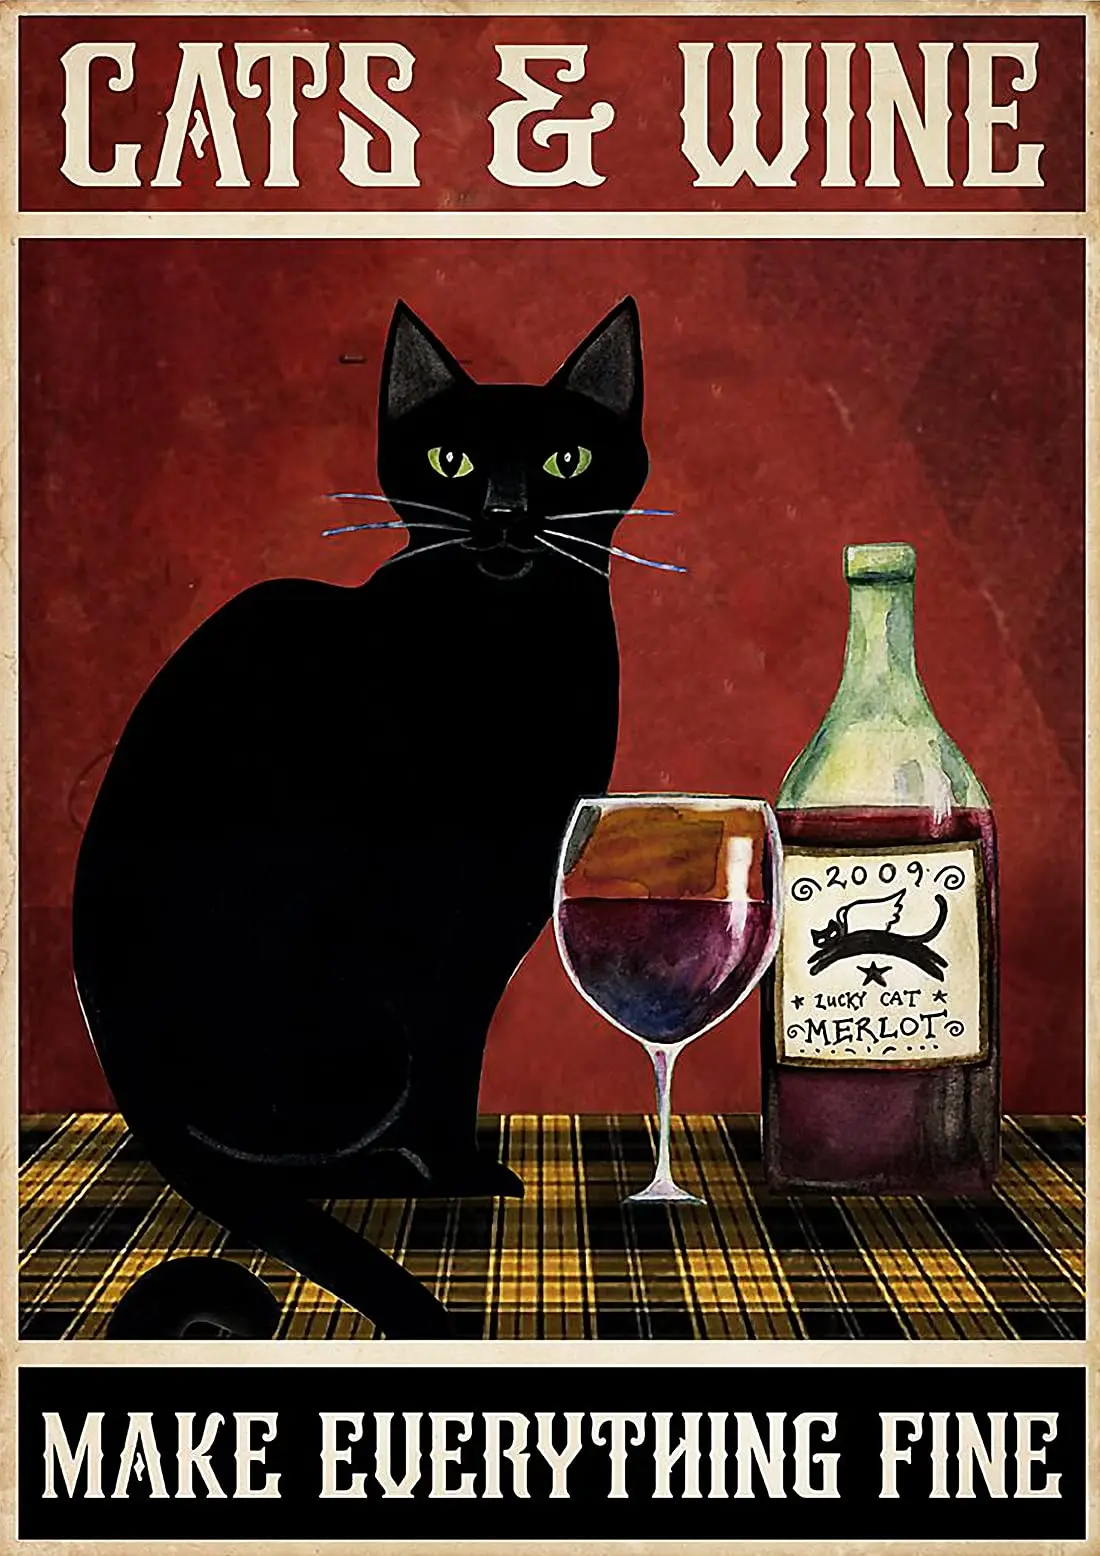 

Lesiker Vintage Black Cat Metal Sign Cat and Wine Make Everything Fine Home Wall Decoration Metal Plaques12 X 8" in